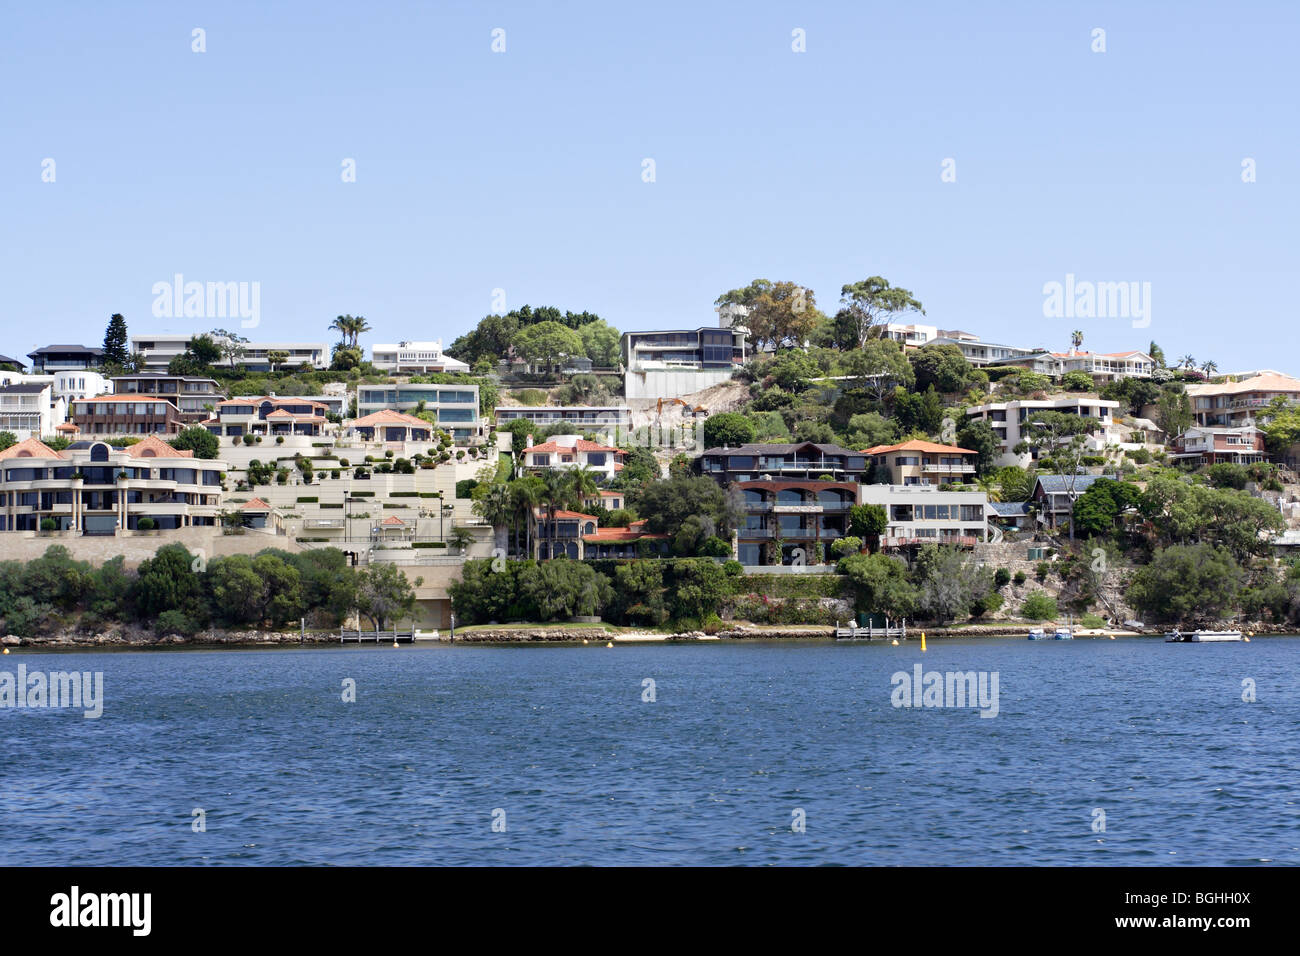 Luxury homes on the bank of Swan River between Perth and Fremantle in Western Australia. Stock Photo